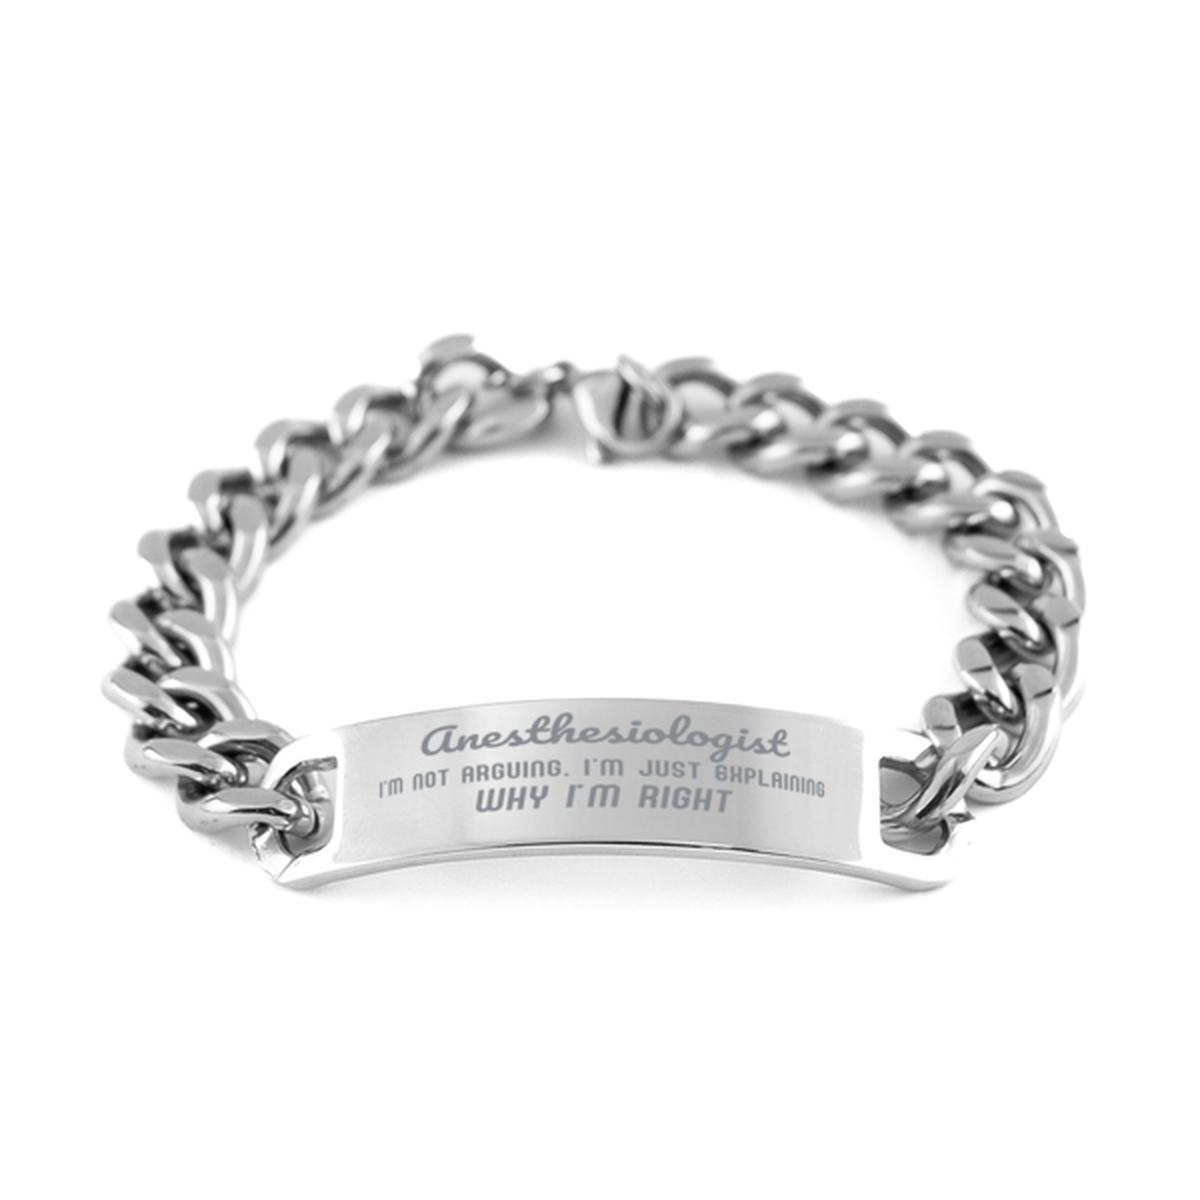 Anesthesiologist I'm not Arguing. I'm Just Explaining Why I'm RIGHT Cuban Chain Stainless Steel Bracelet, Graduation Birthday Christmas Anesthesiologist Gifts For Anesthesiologist Funny Saying Quote Present for Men Women Coworker